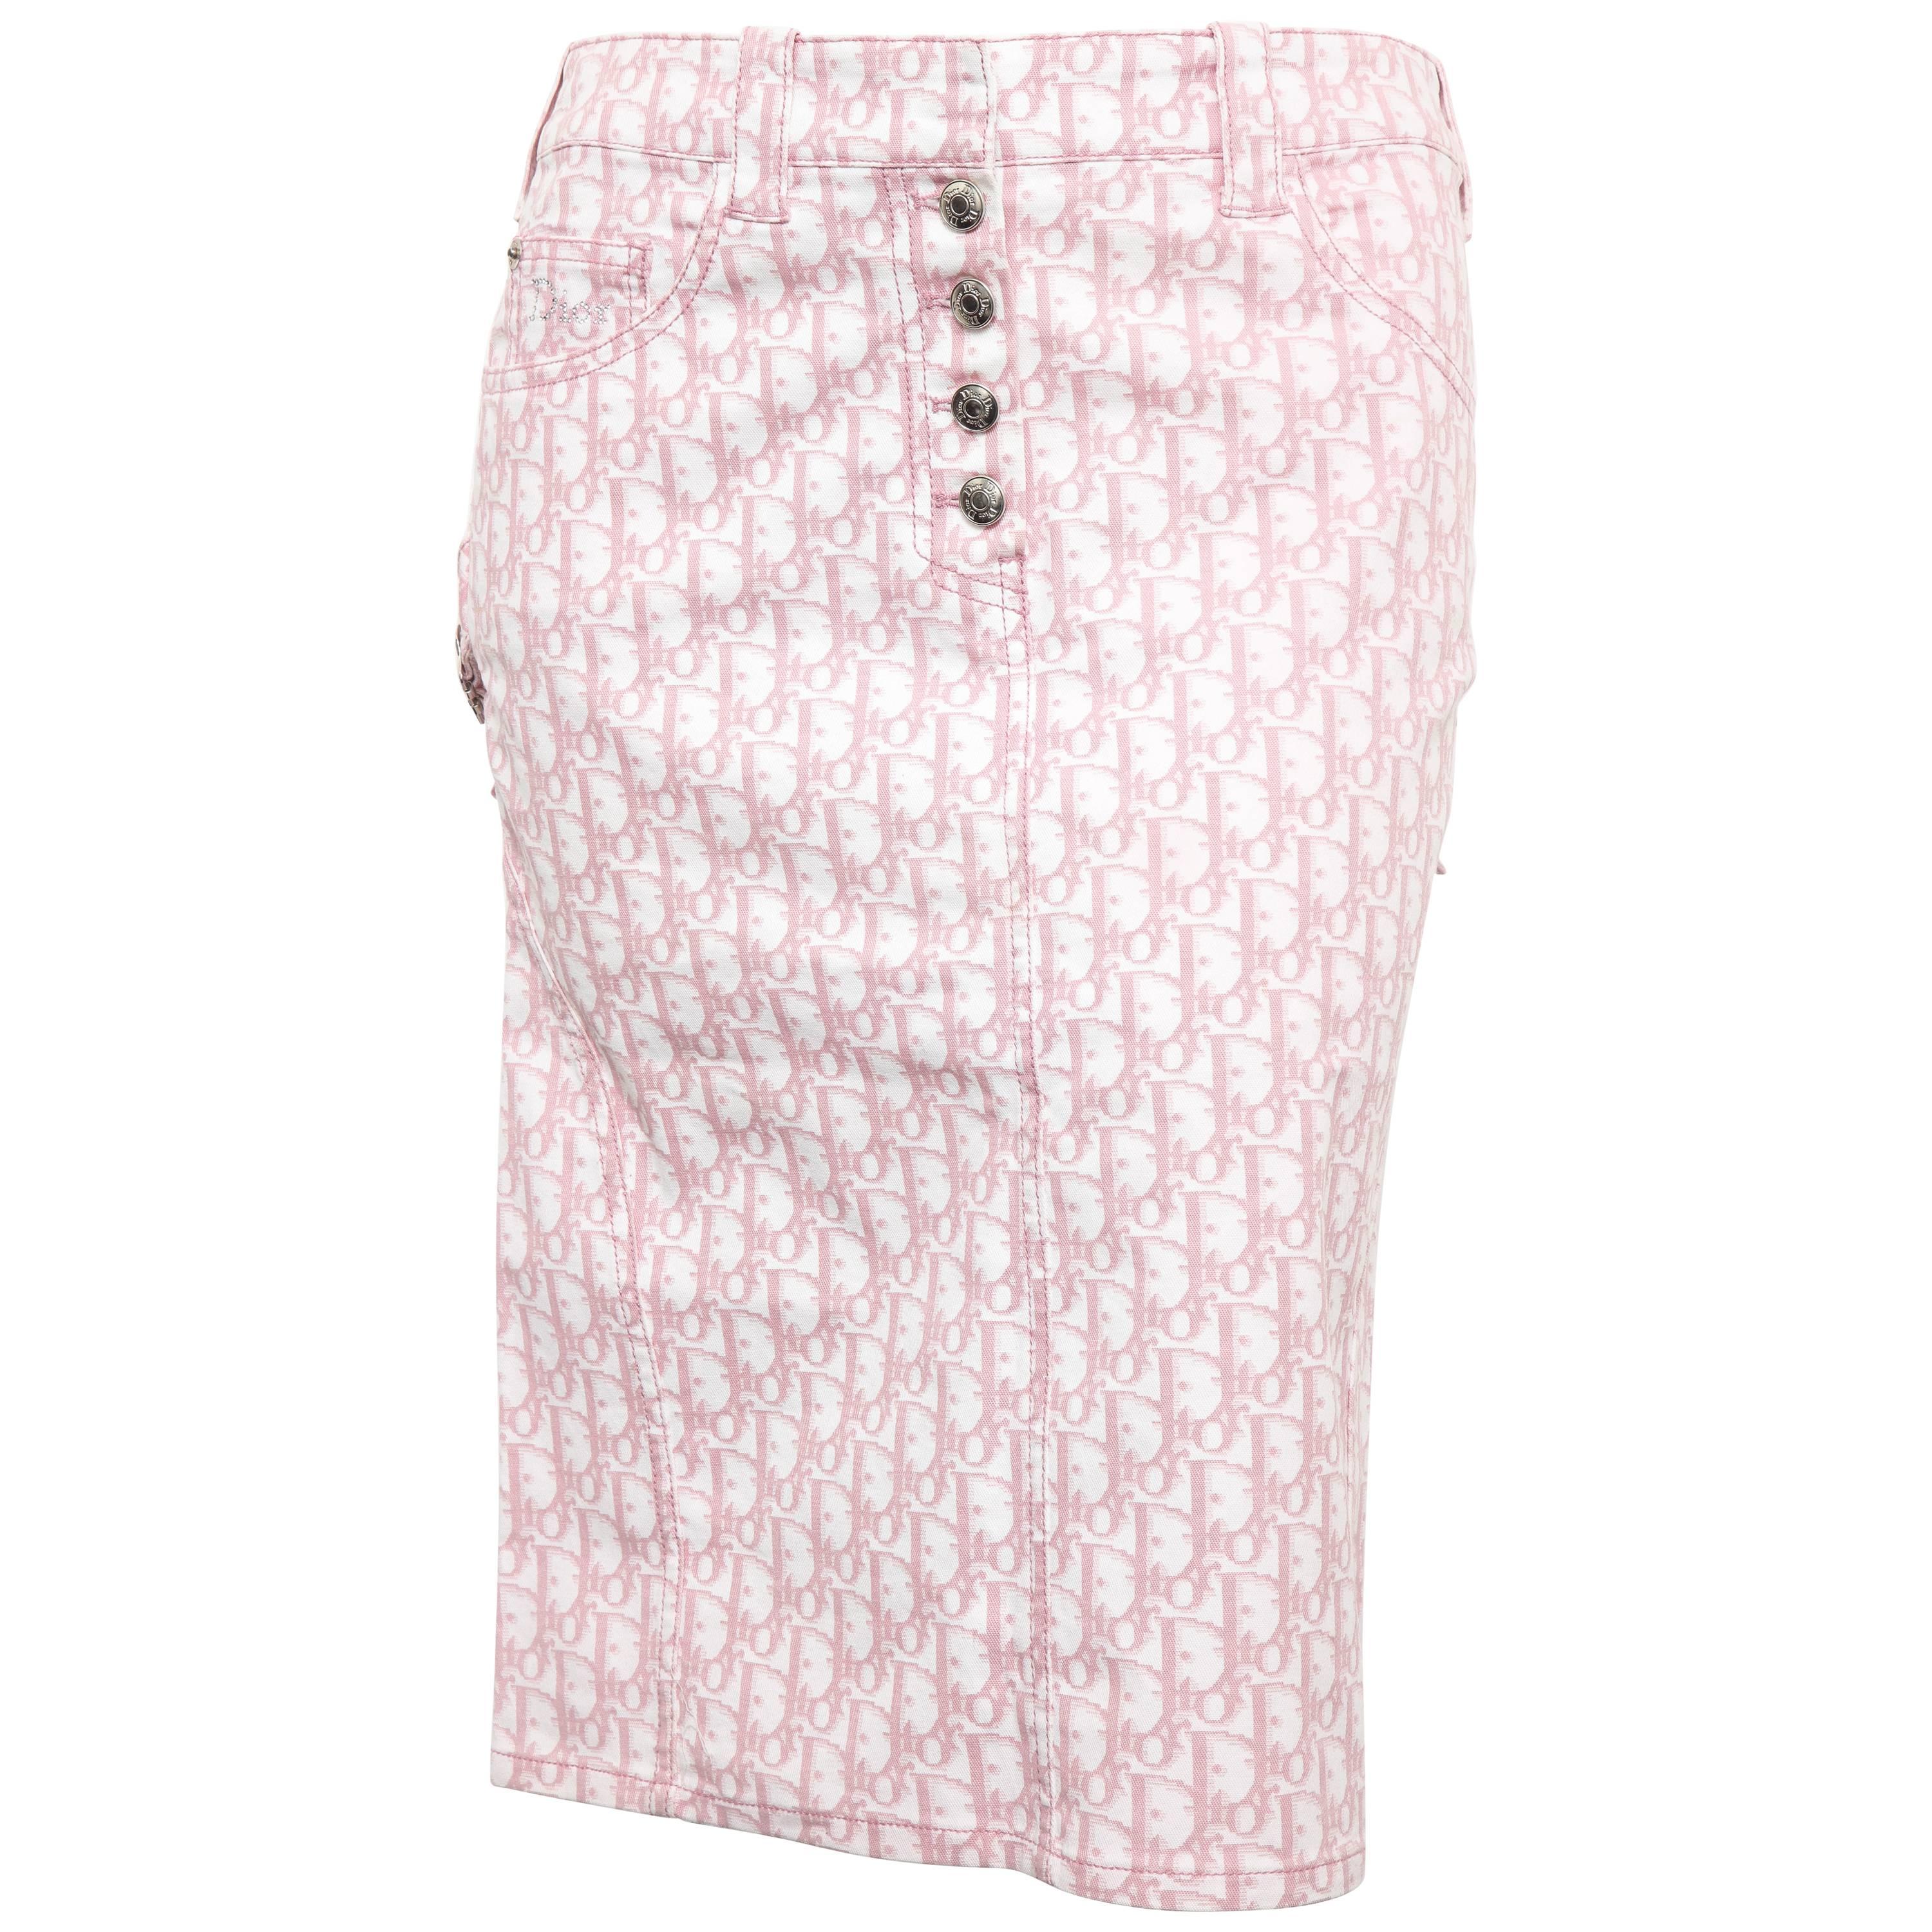 John Galliano for Christian Dior Pink Trotter Logo Pencil Skirt For Sale